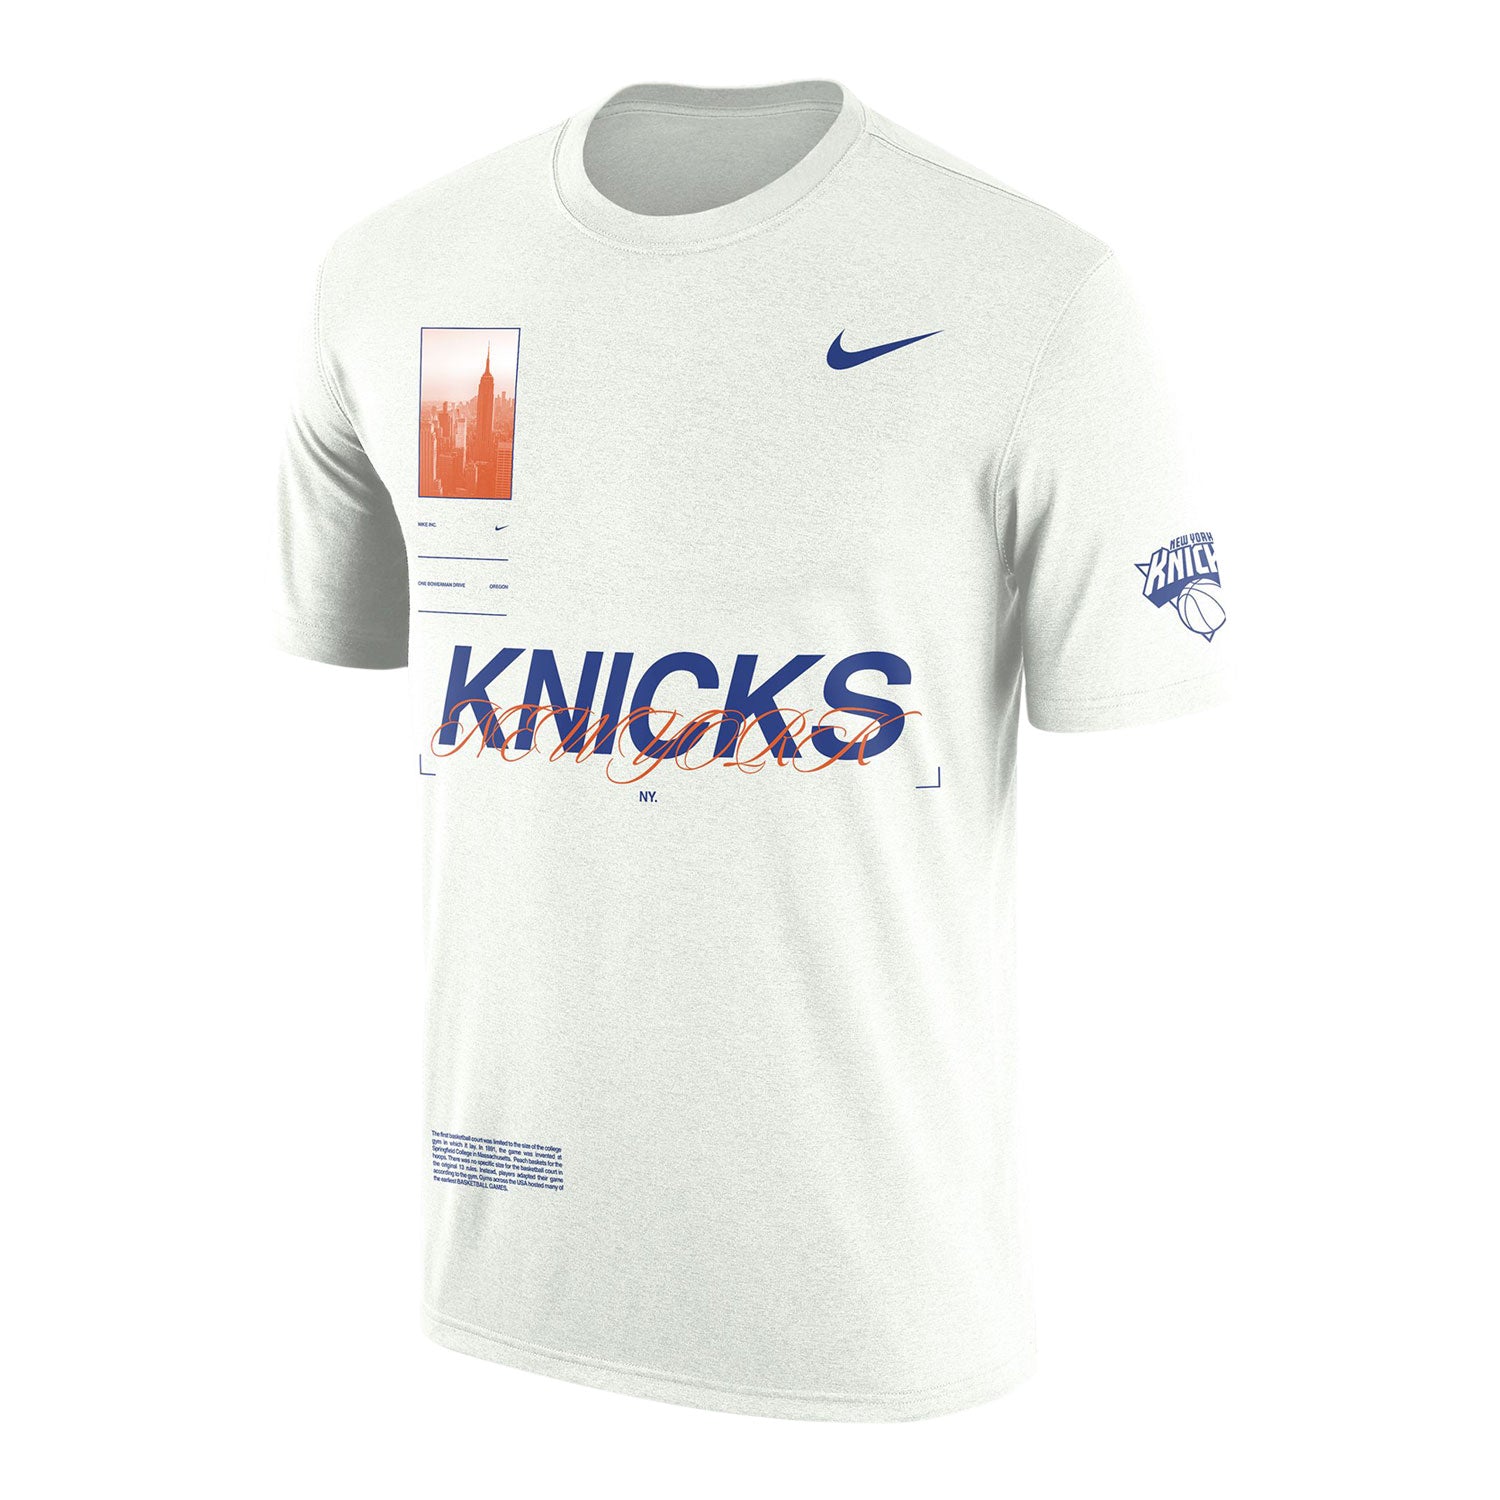 Nike Knicks Courtside Tee - In White - Front View